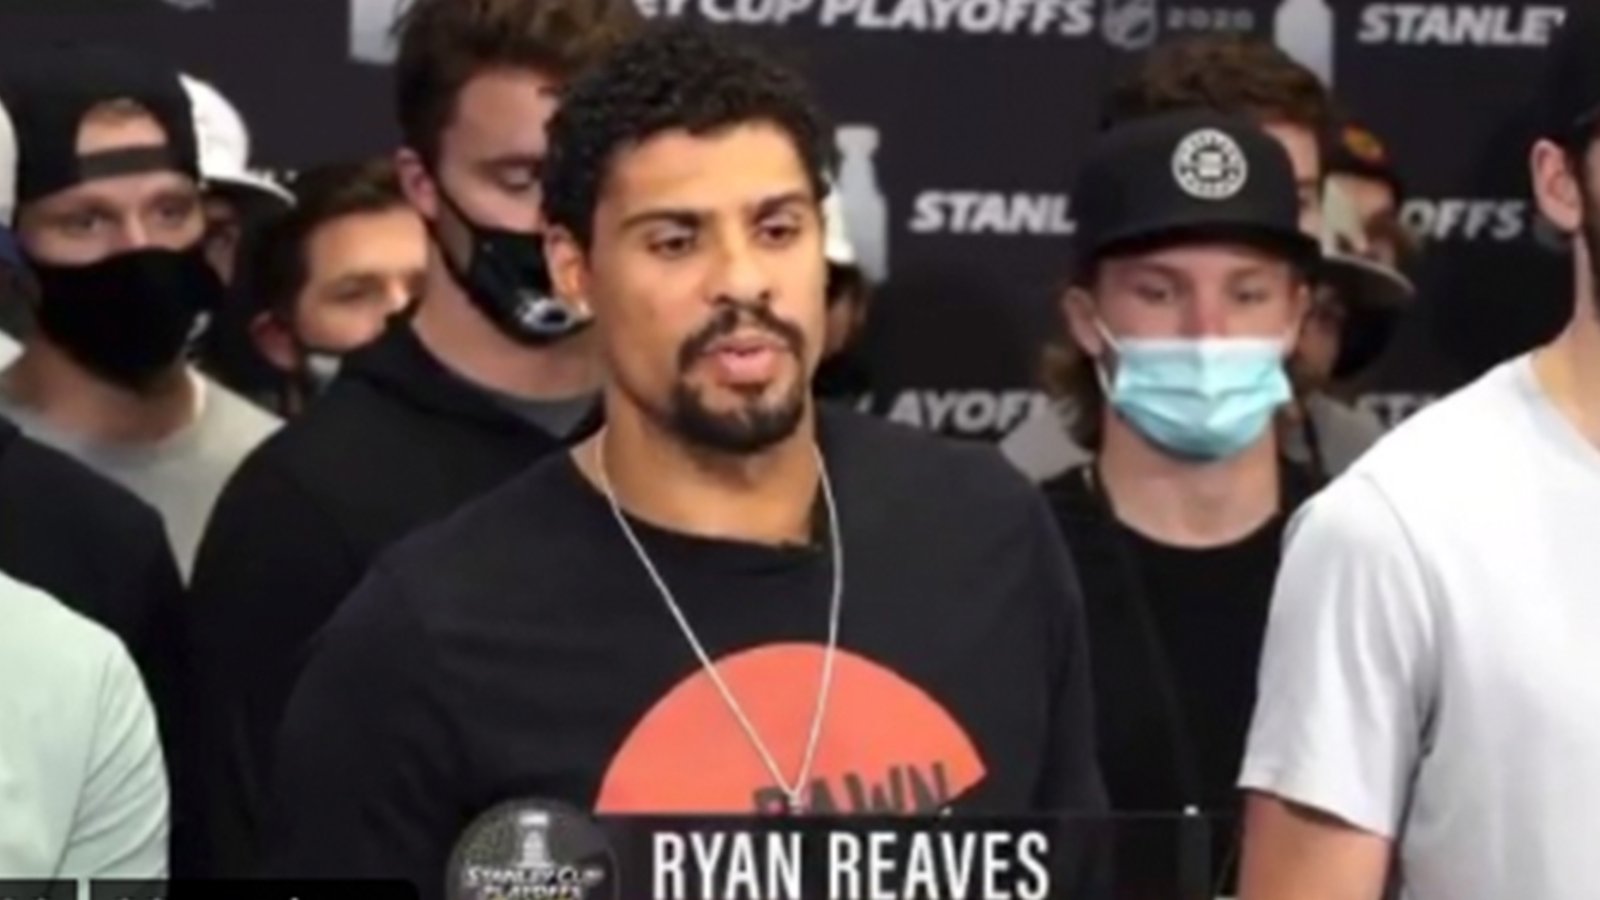 Ryan Reaves gives a stirring speech about the NHL's protest